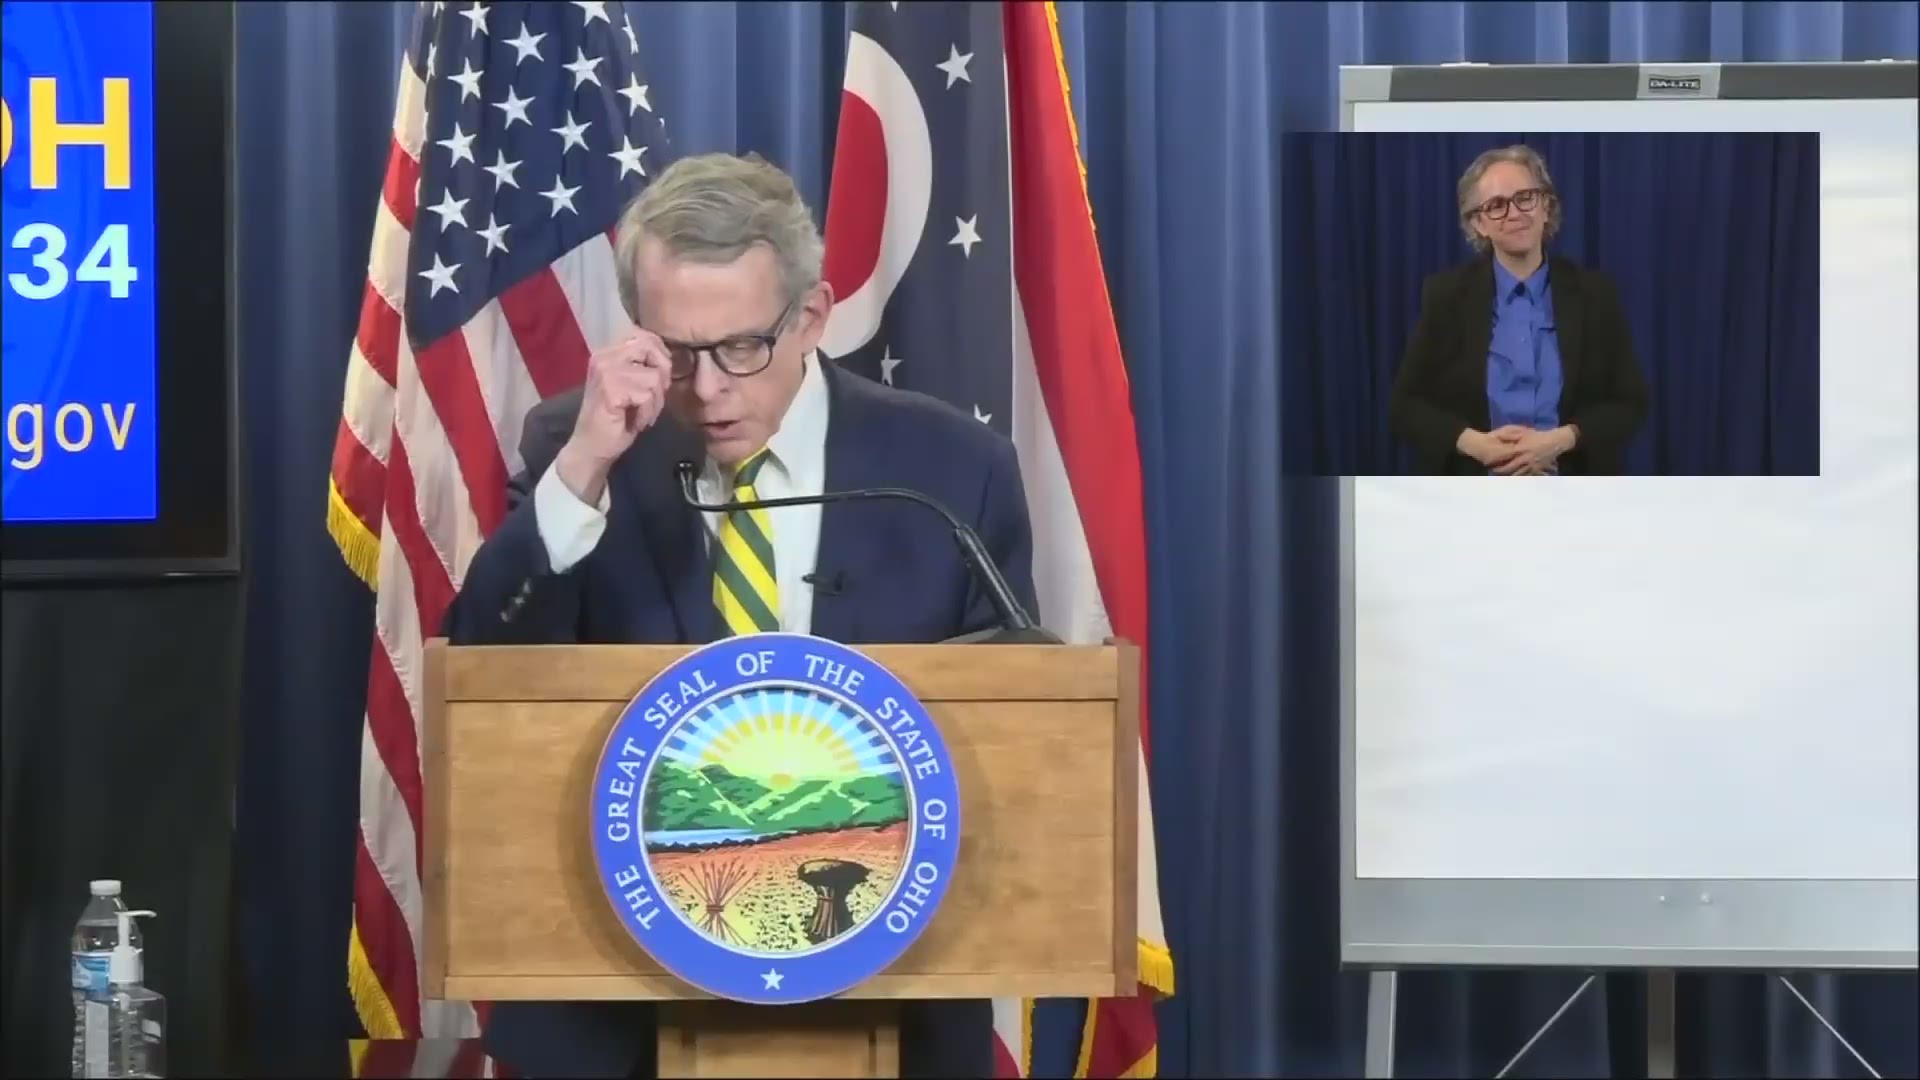 Ohio Governor Mike DeWine announced on Friday that the state will cover the costs of its youth 'aging out' foster care plan until the end of the coronavirus.